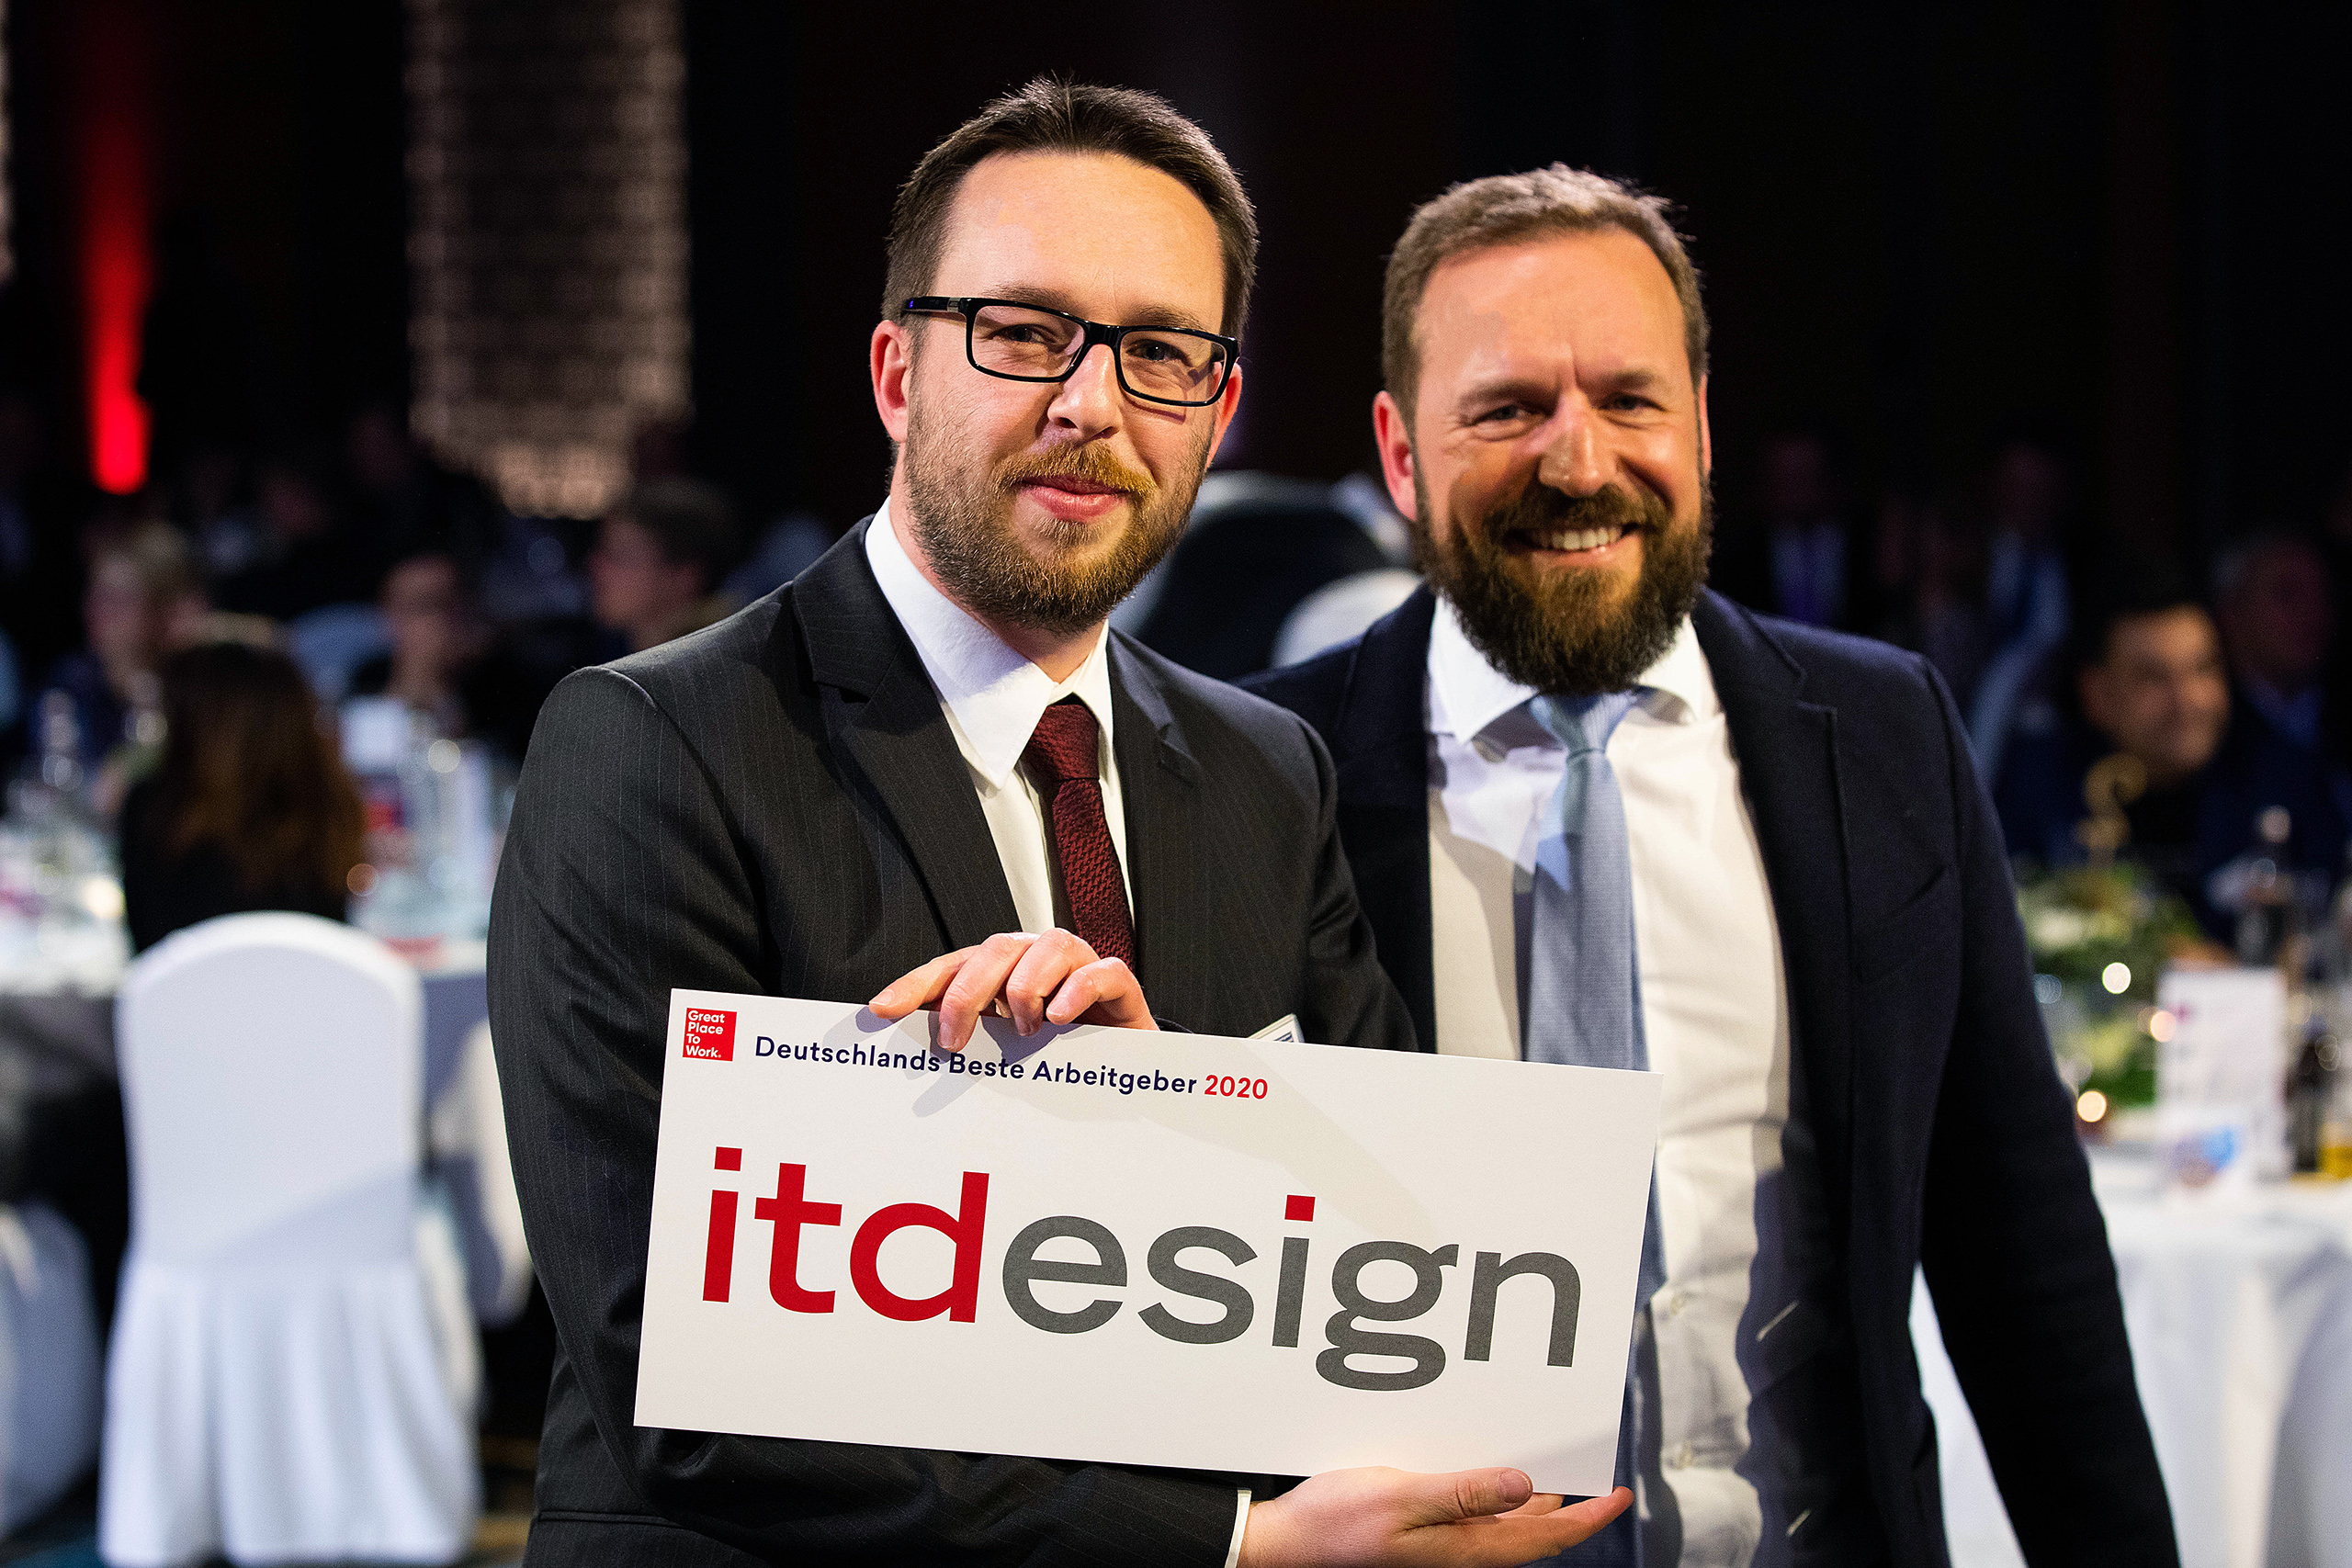 itdesign ist Great Place to Work